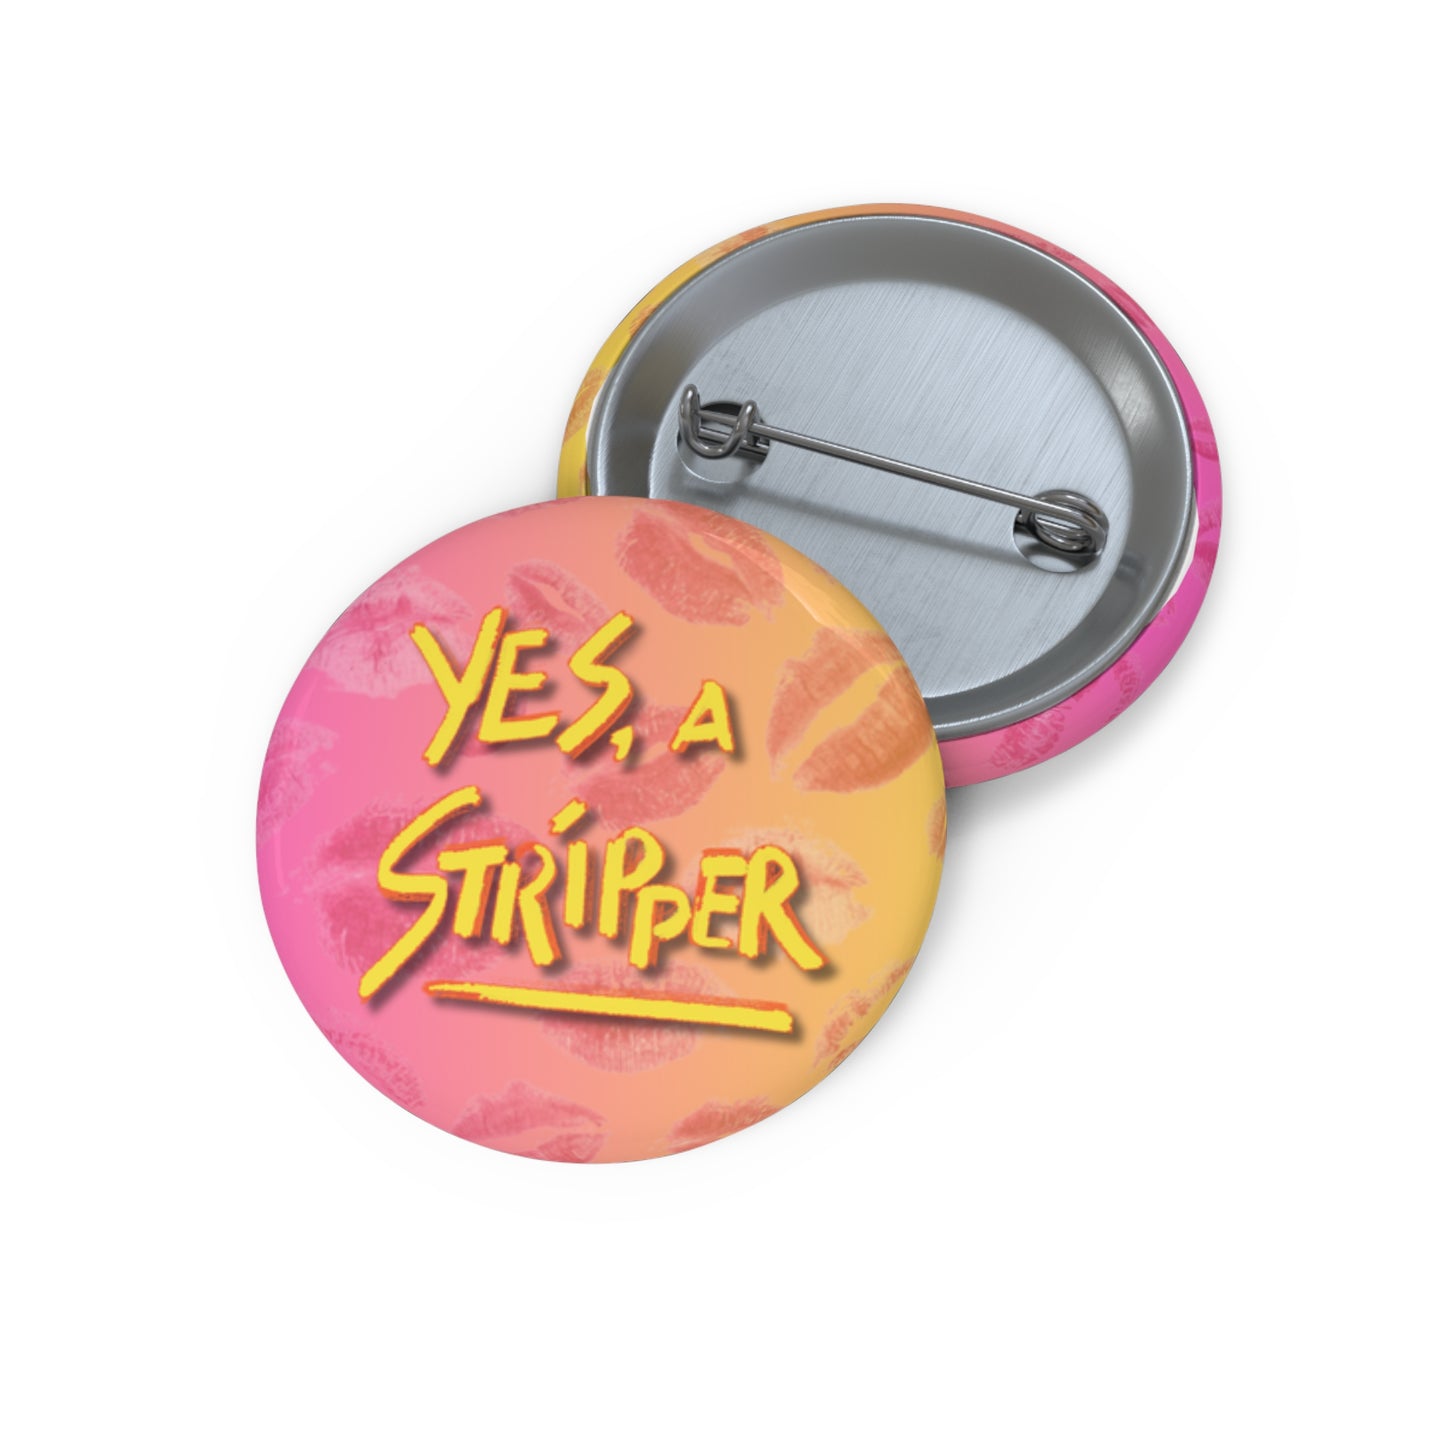 "Kissing" Yes, a Stripper Pin (Pink + Yellow)